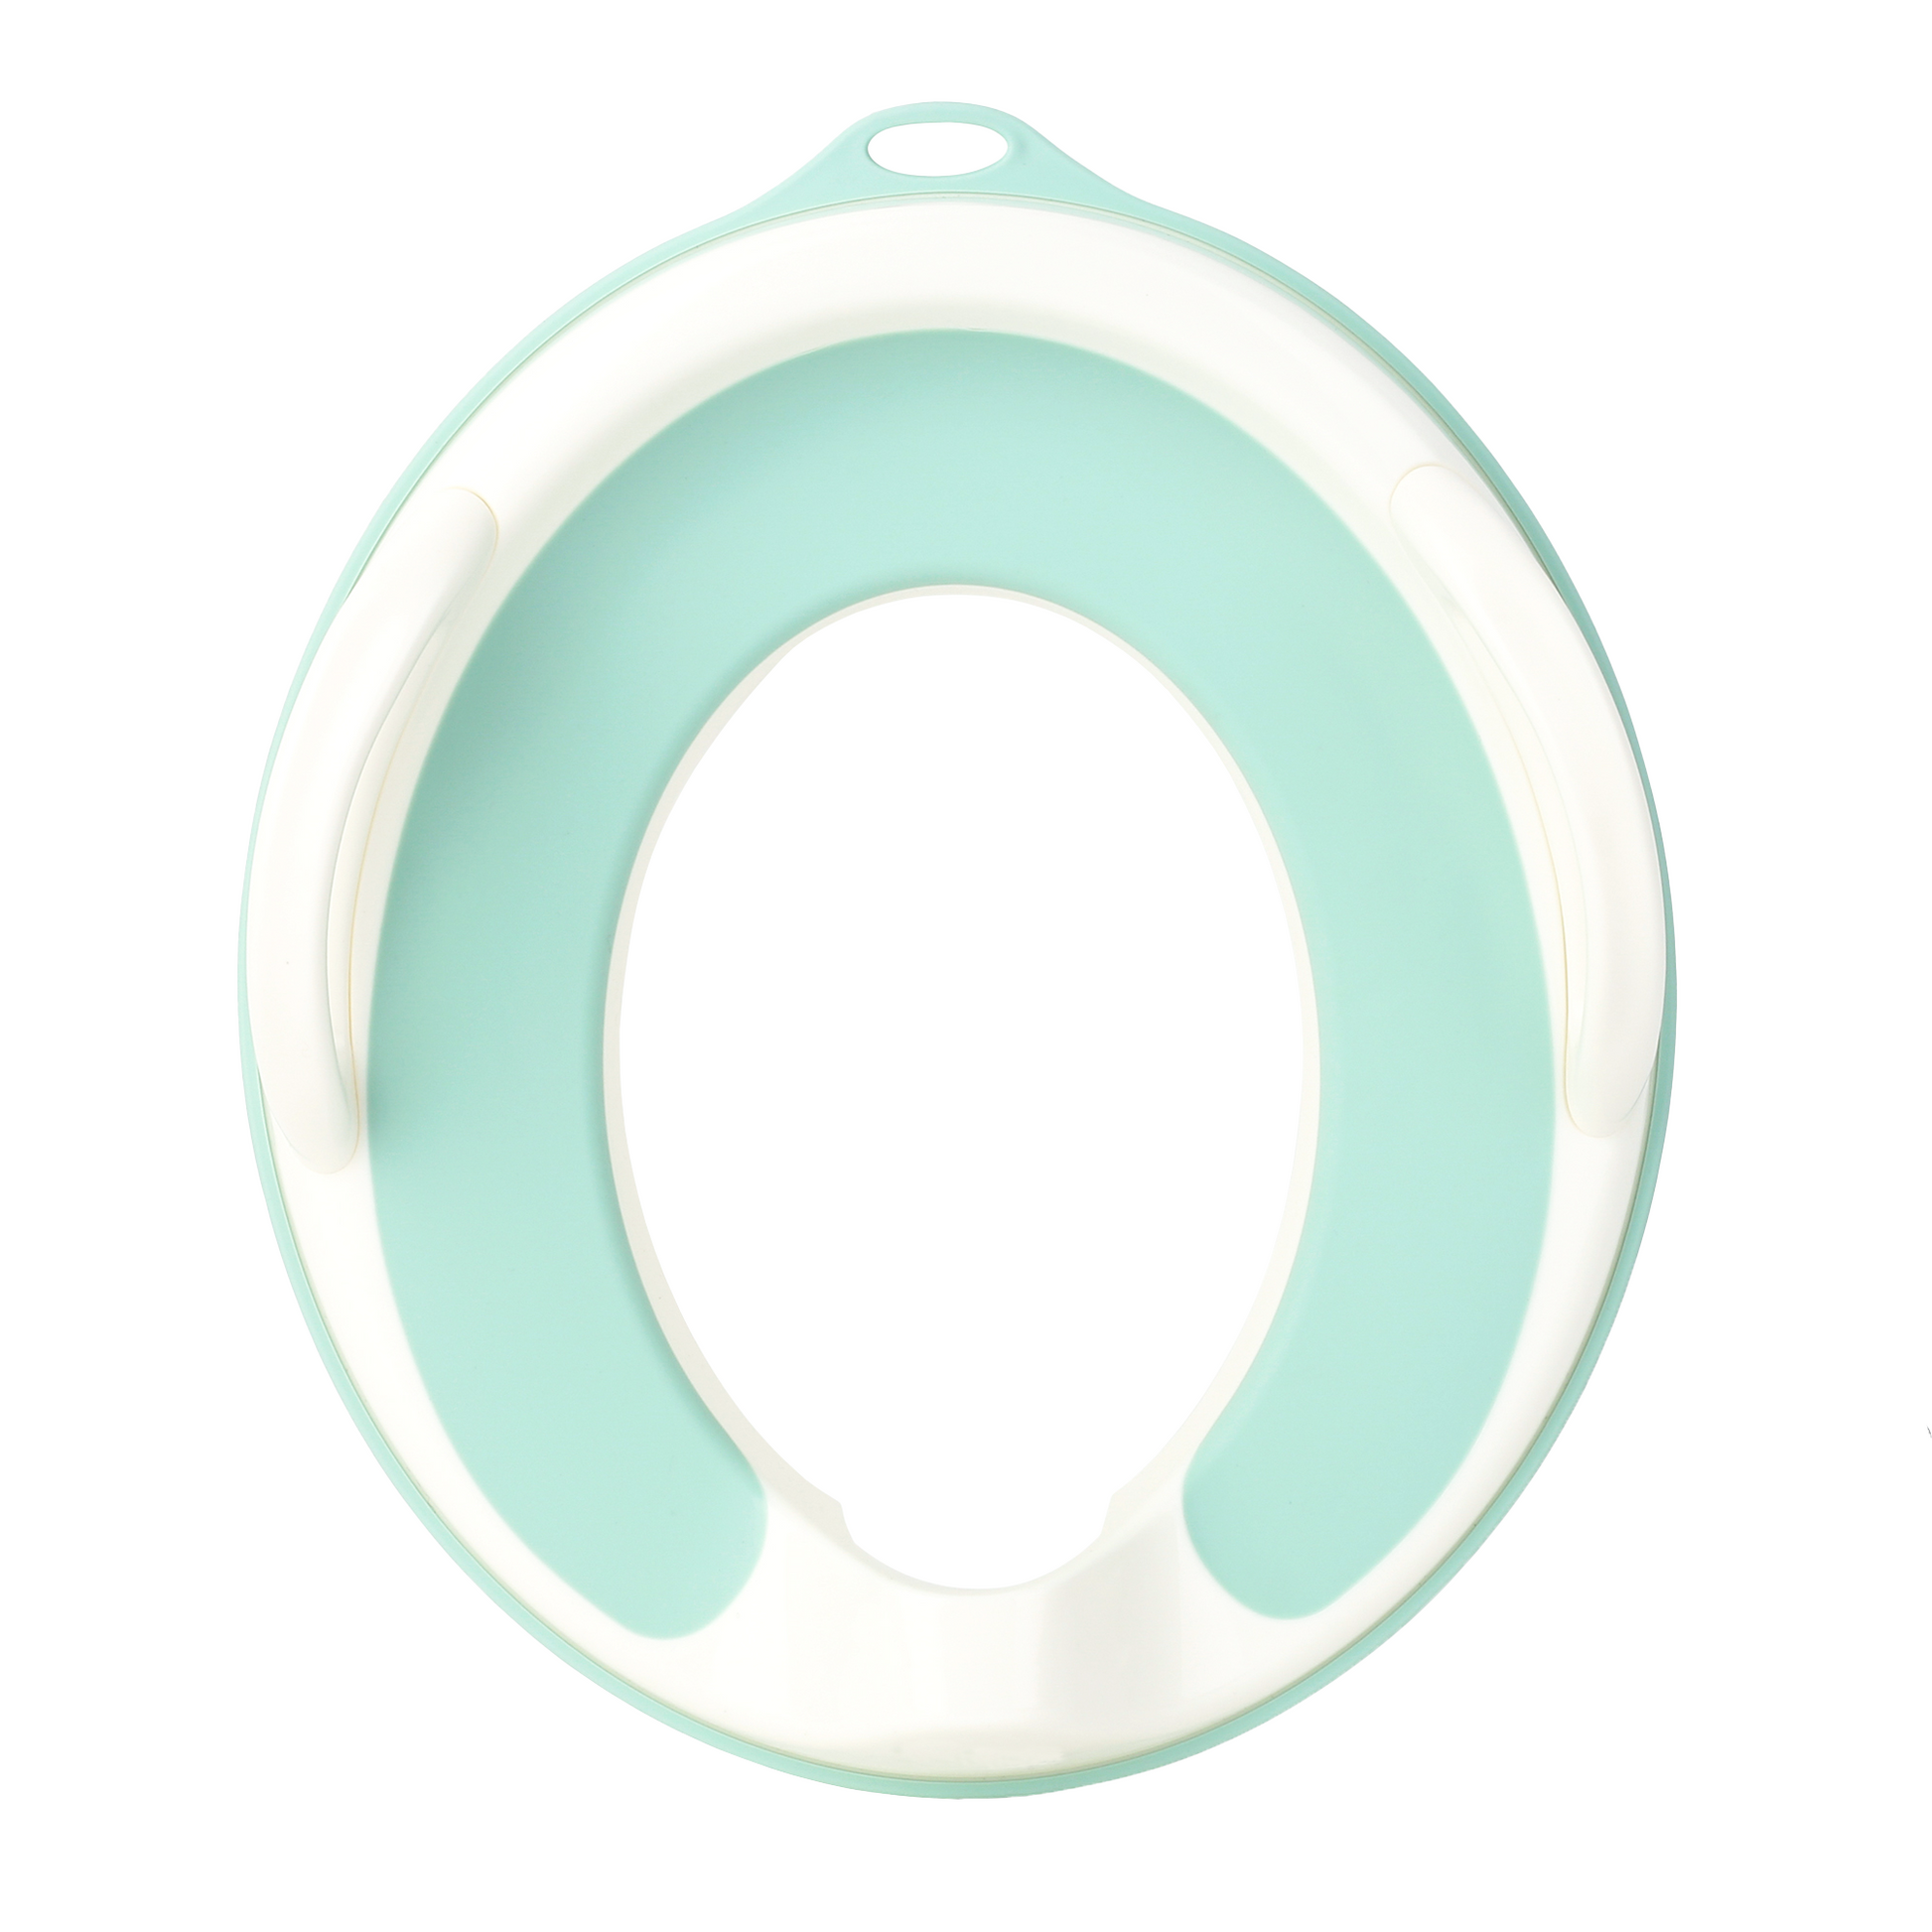 Potty Training Seat for Boys and Girls with Handles, Fits Round & Oval Toilets, Non-Slip with Splash Guard, Includes Free Storage Hook - Jool Baby